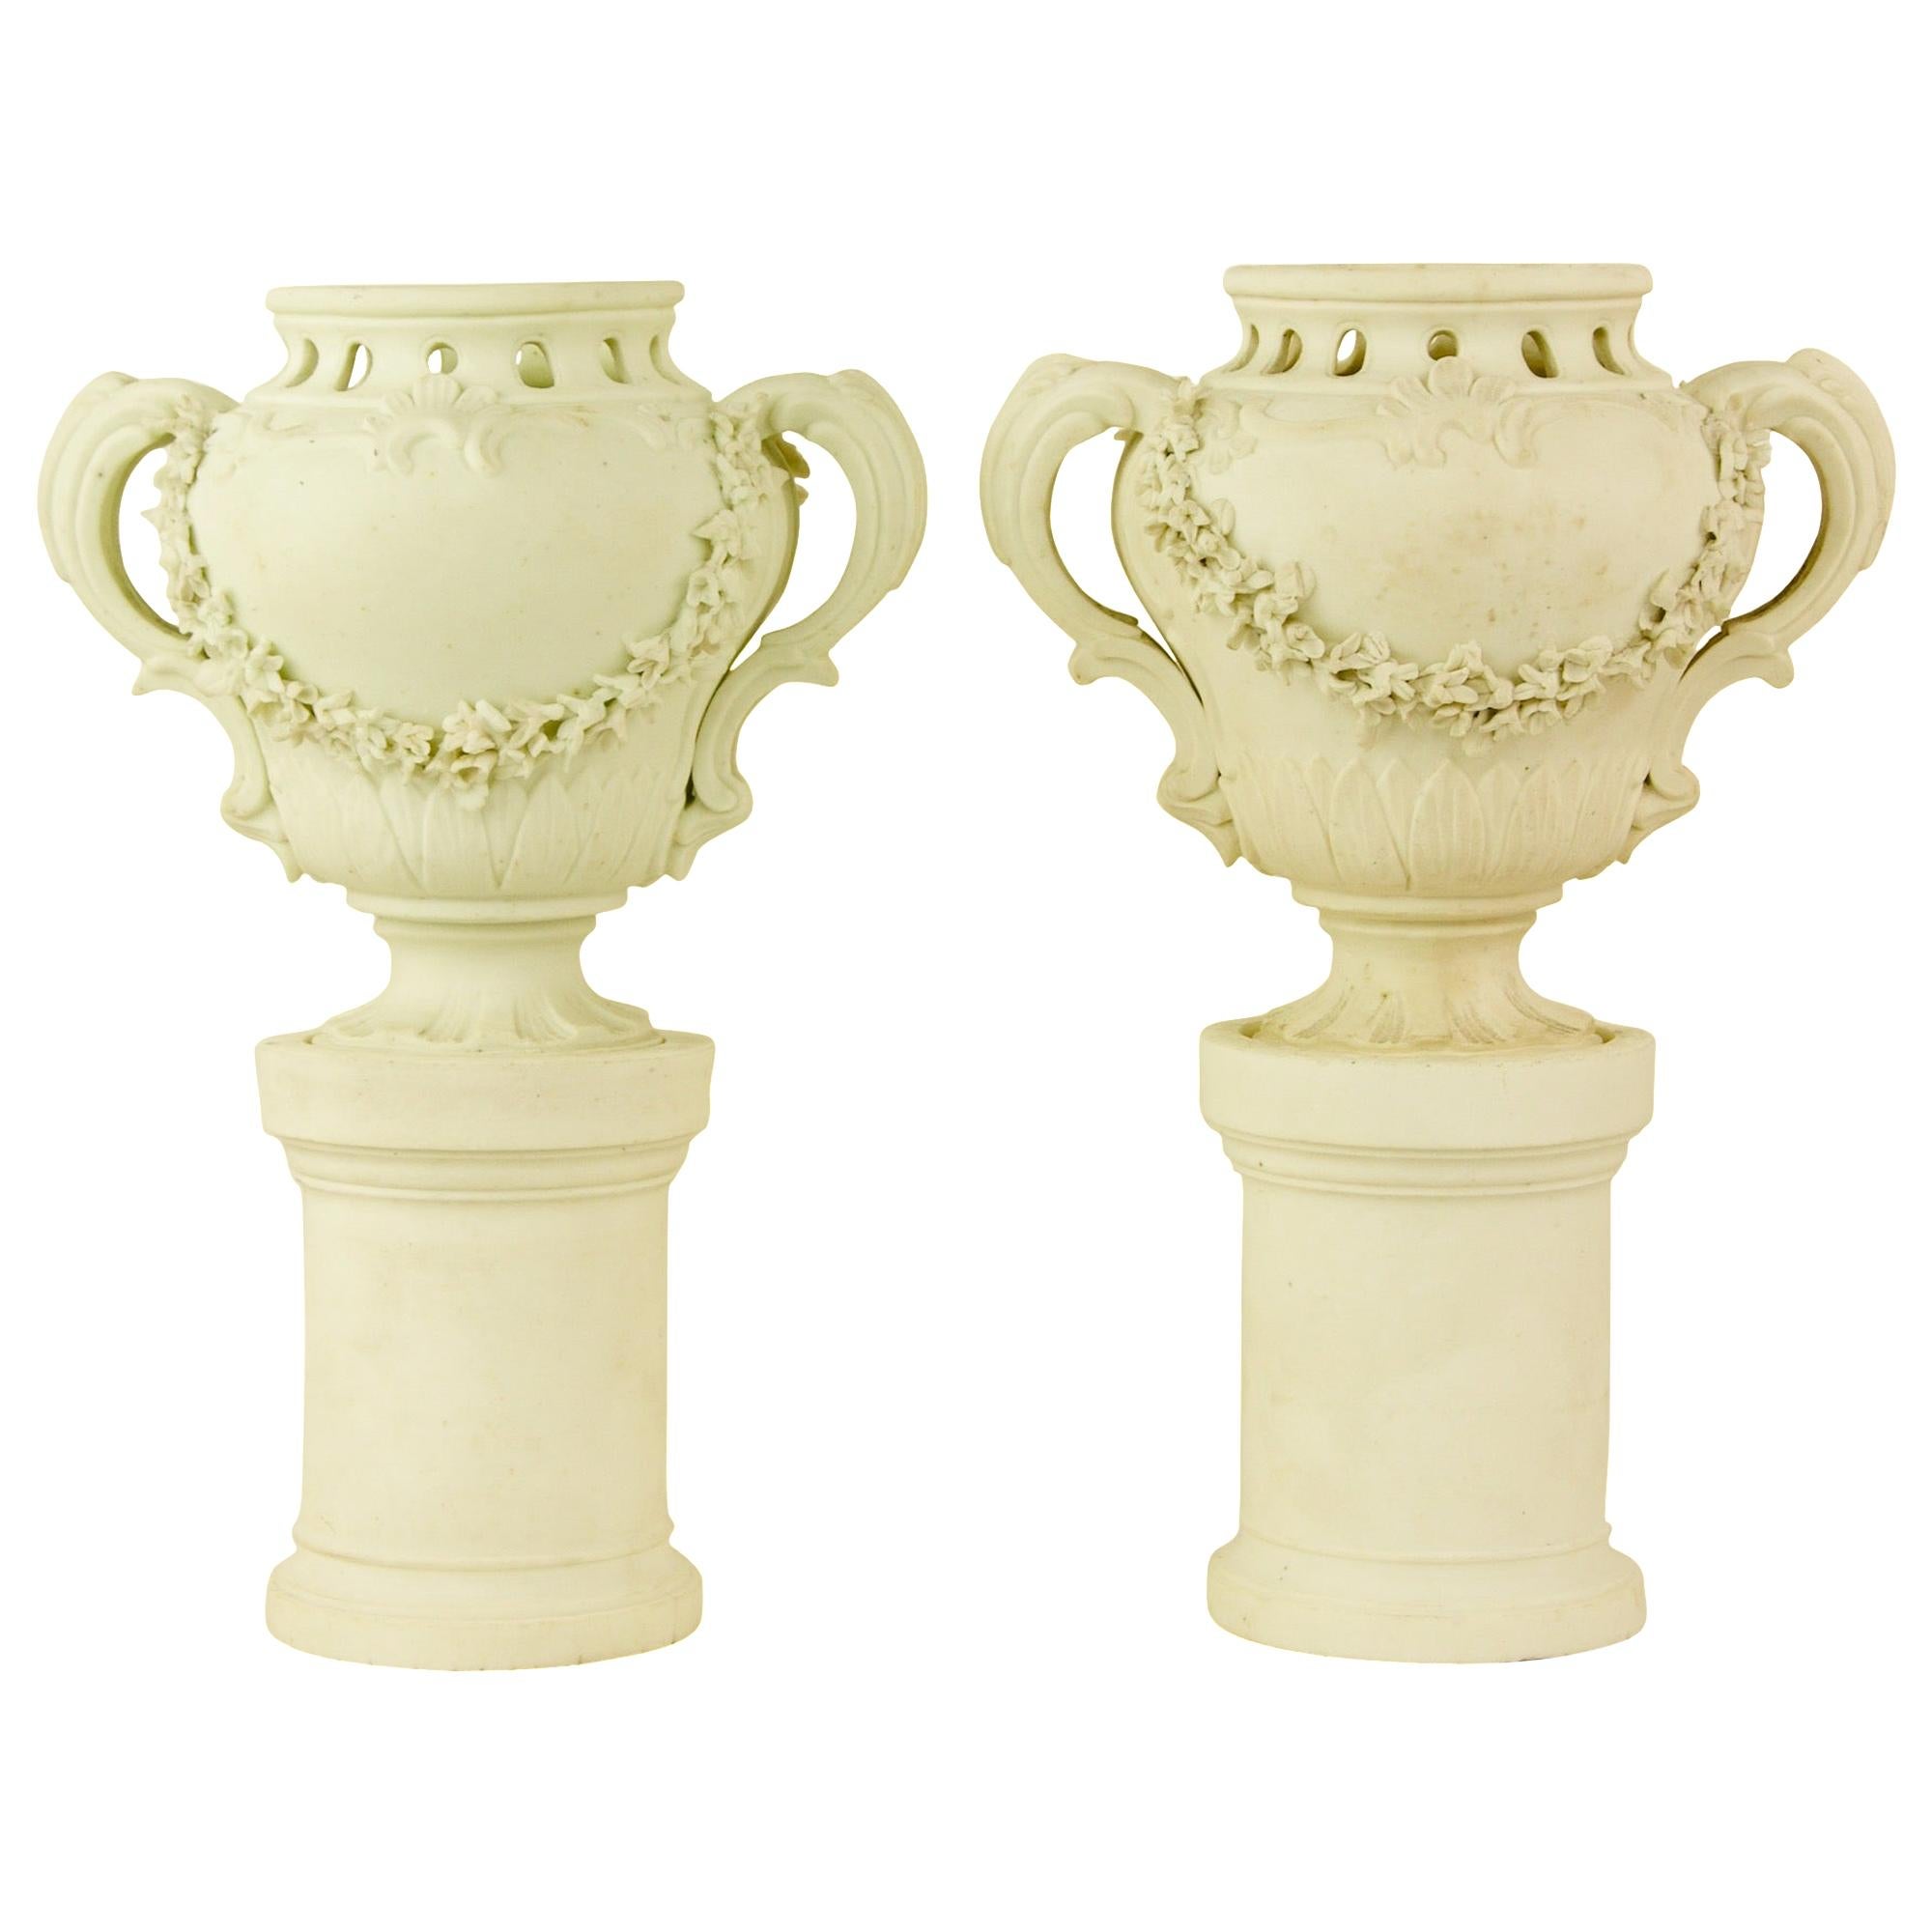 Pair of French Mid-18th Century Biscuit Porcelain Louis XV Vases and Pedestals